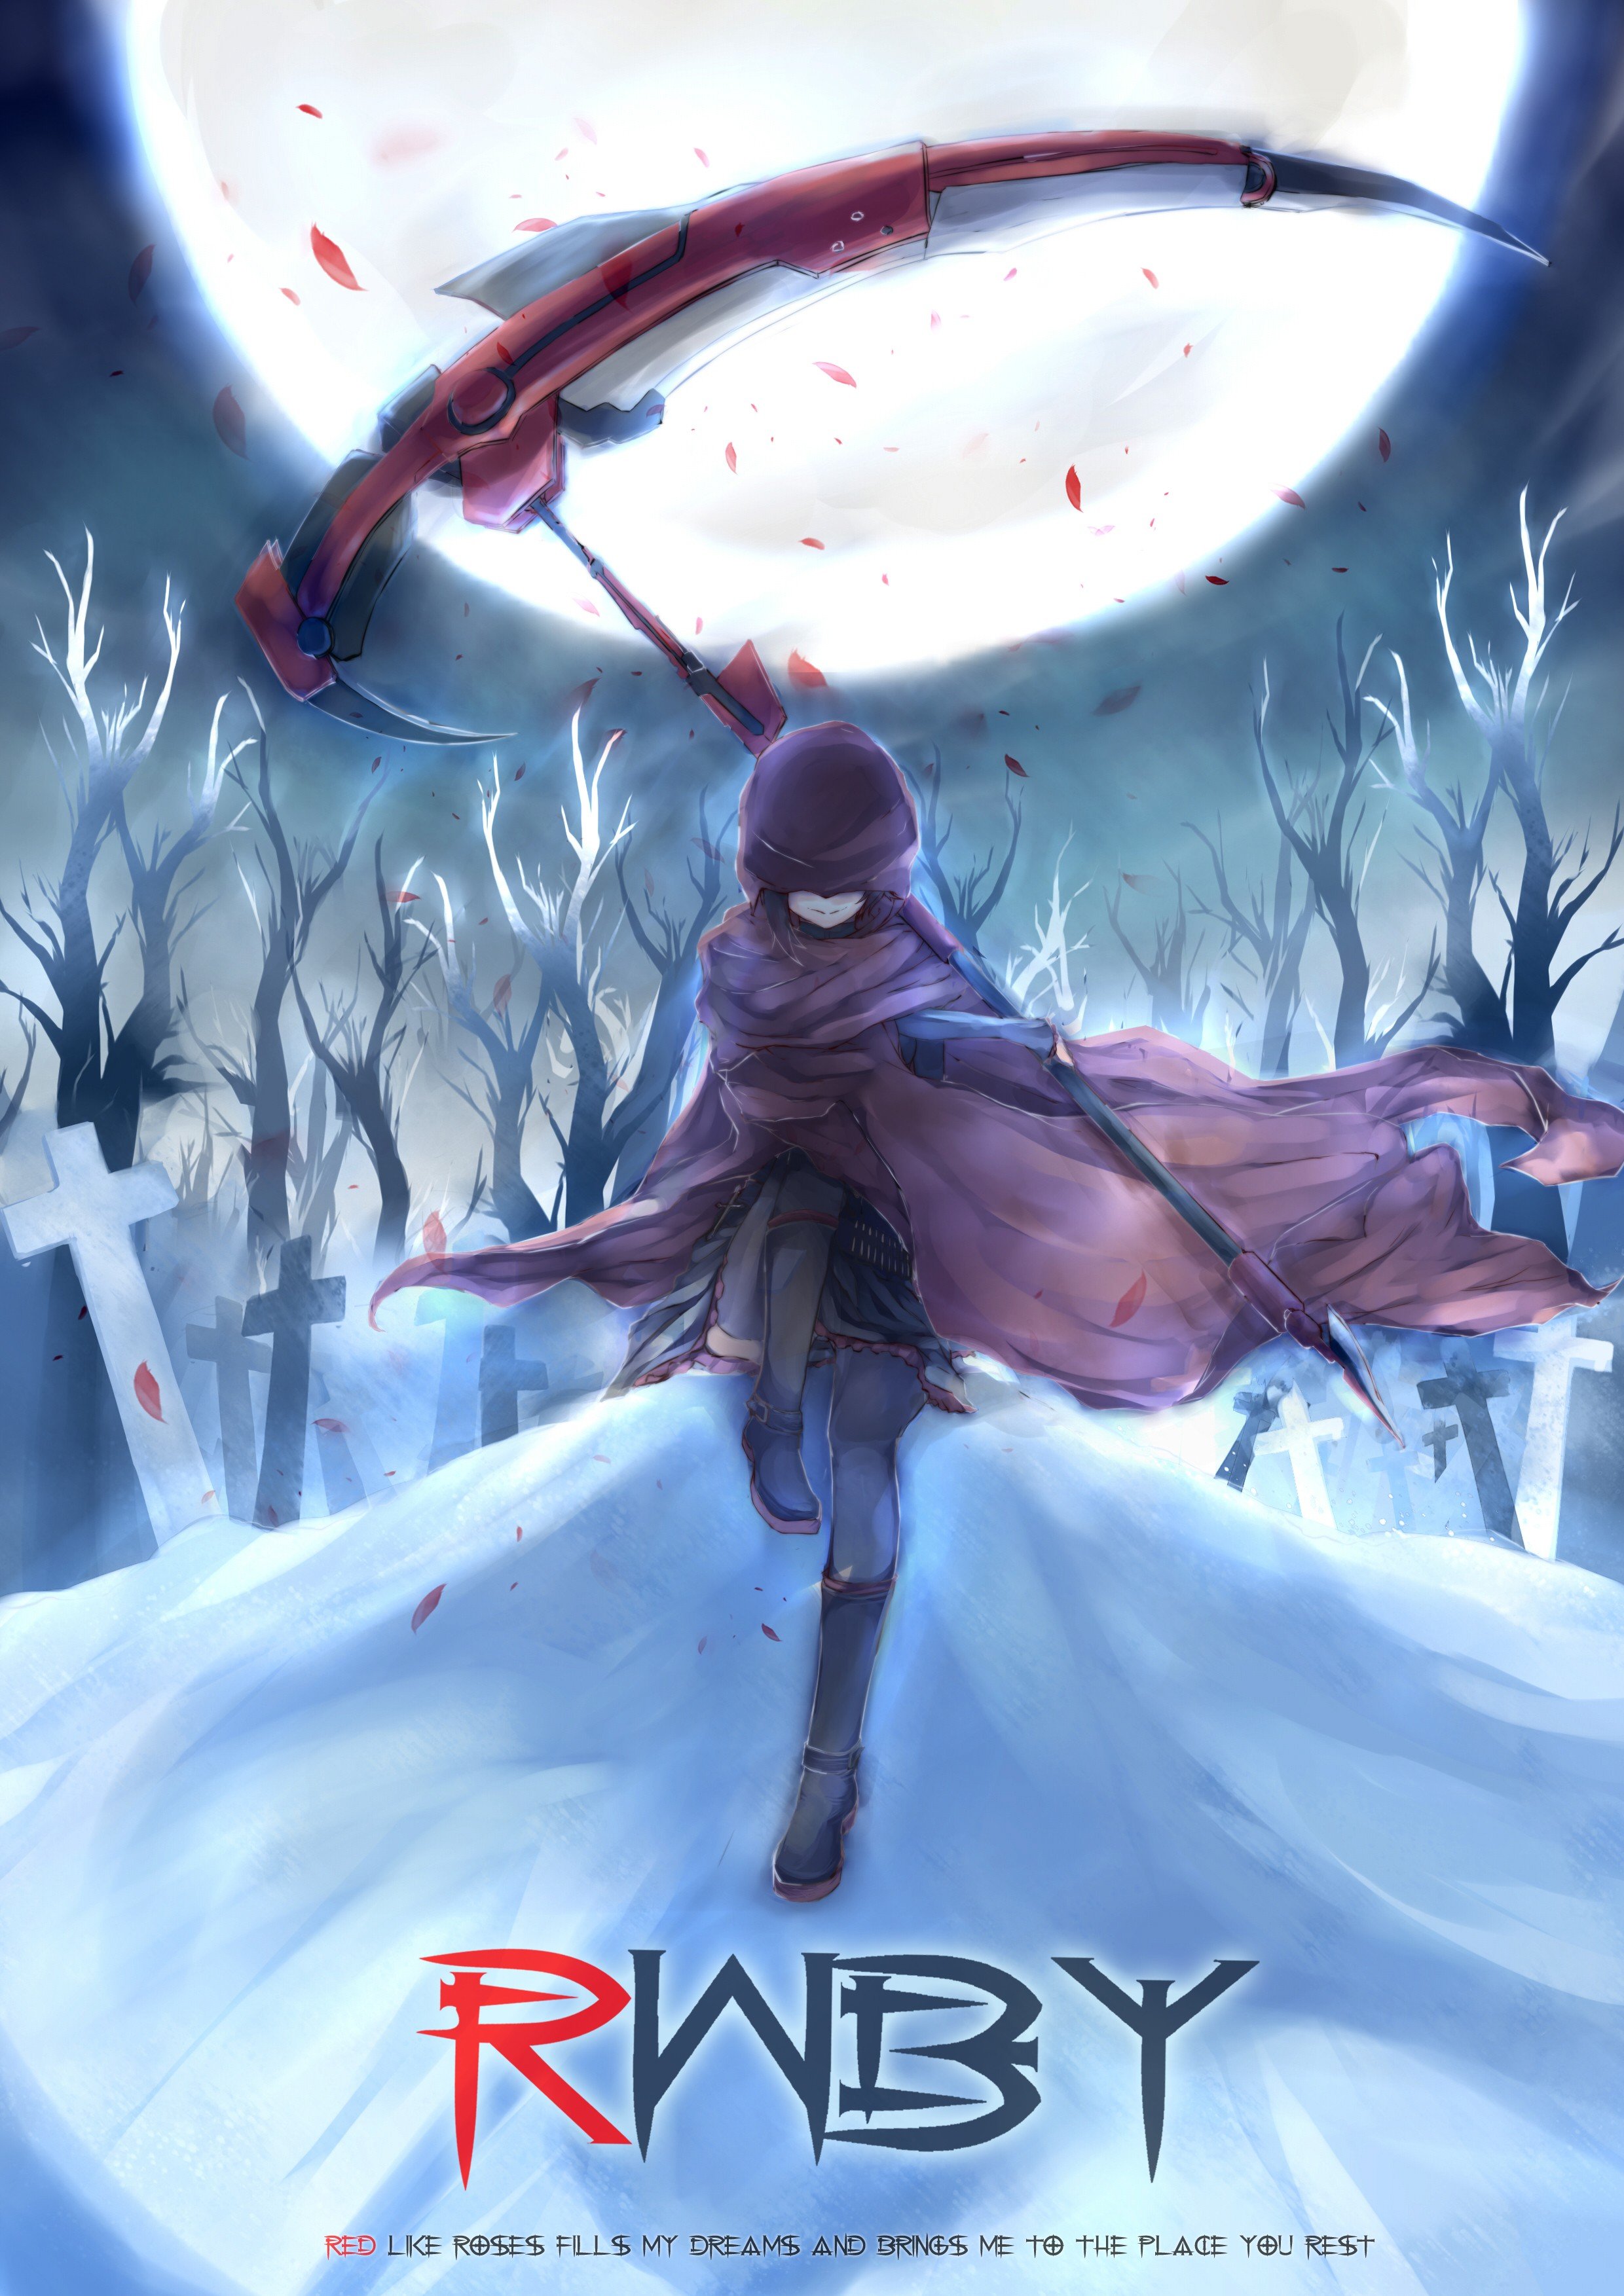 boots, Clouds, Nature, Winter, Snow, Cross, Trees, Night, Forests, Text, Scythe, Moon, Skirts, Outdoors, Weapons, Jackets, Short, Hair, Thigh, Highs, Ammunition, Smiling, Sitting, Hoodies, Anime, Flower, Petals, Wallpaper